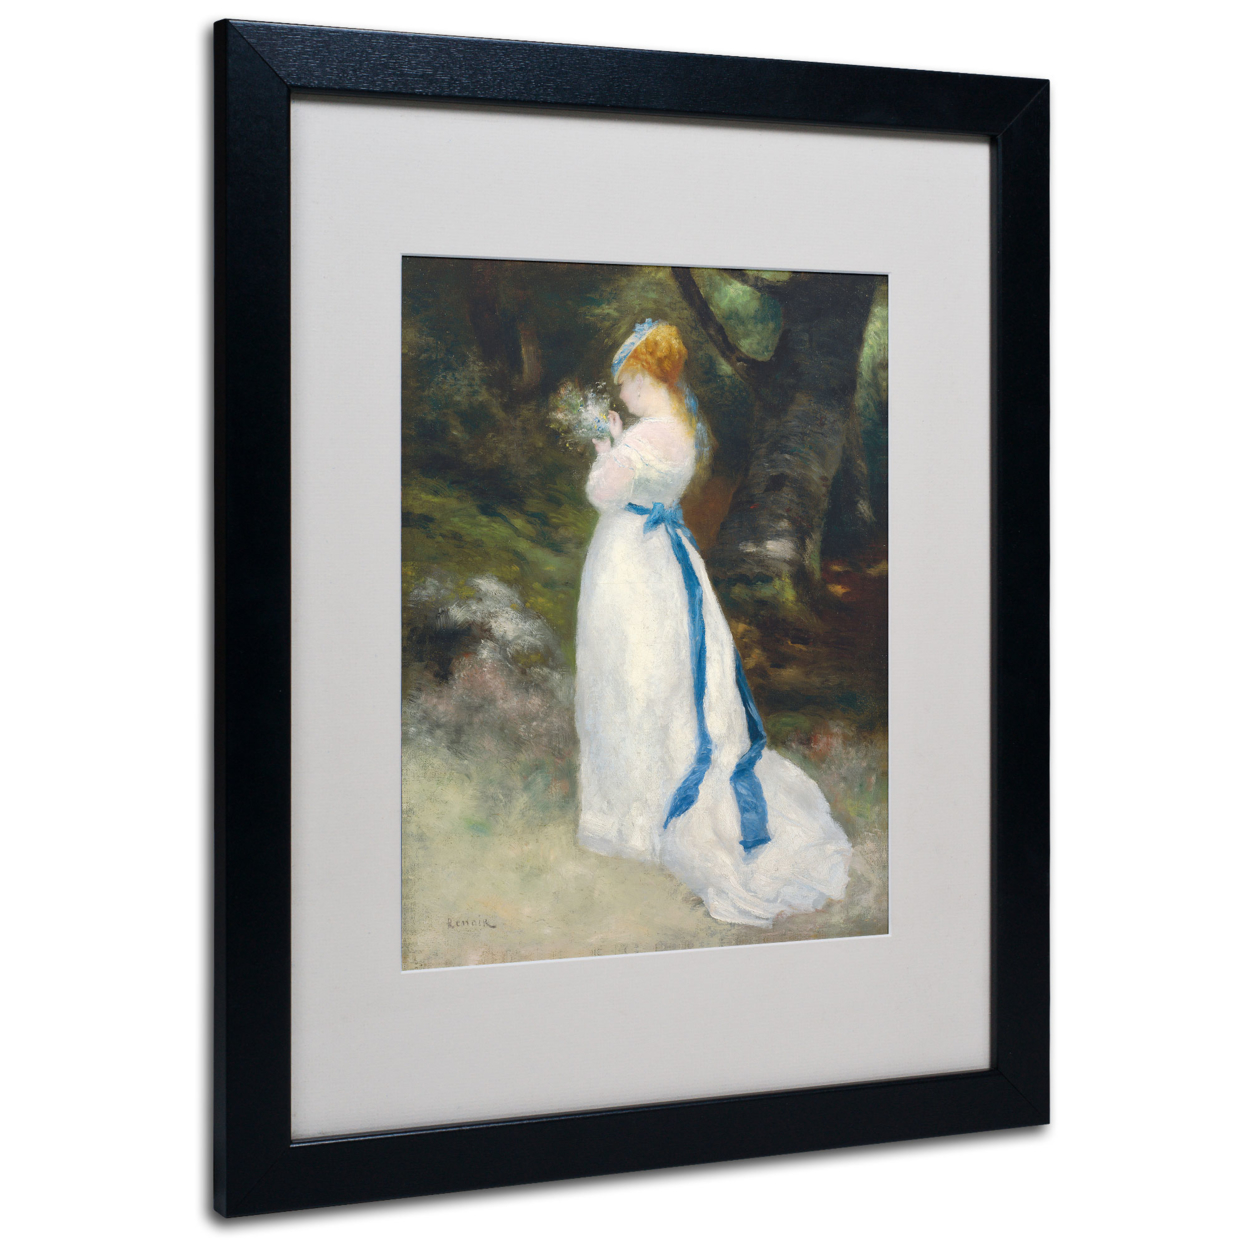 Pierre Renoir 'Lady In White' Black Wooden Framed Art 18 X 22 Inches